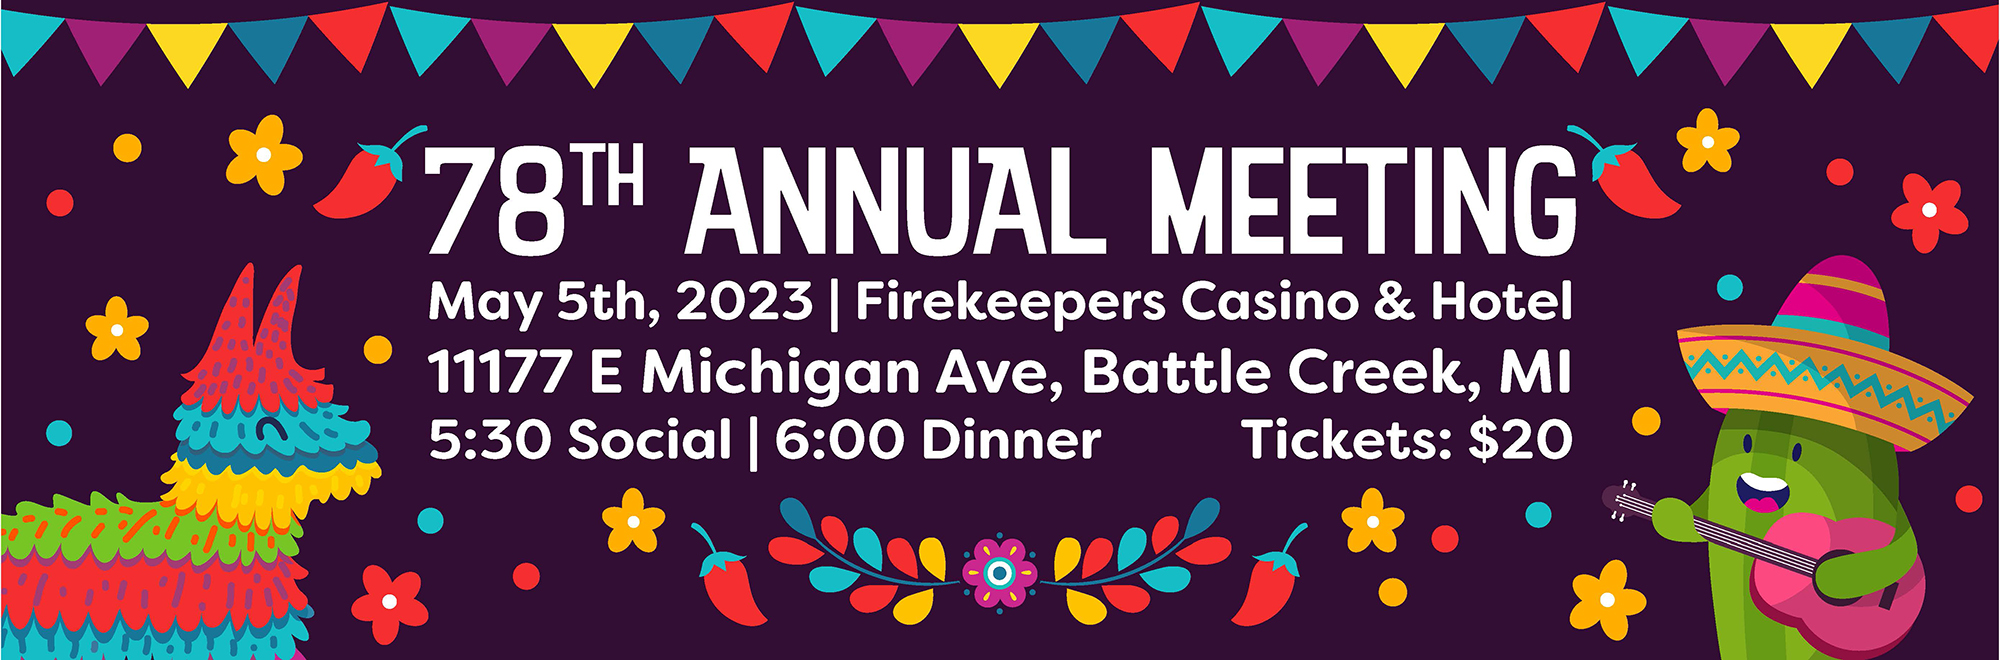 78th Annual Meeting May 5th, 2023 FireKeepers Casino & Hotel  111 77 E Michigan Ave, Battle Creek, MI 5:30 Social 6:00 Dinner Tickets: $20